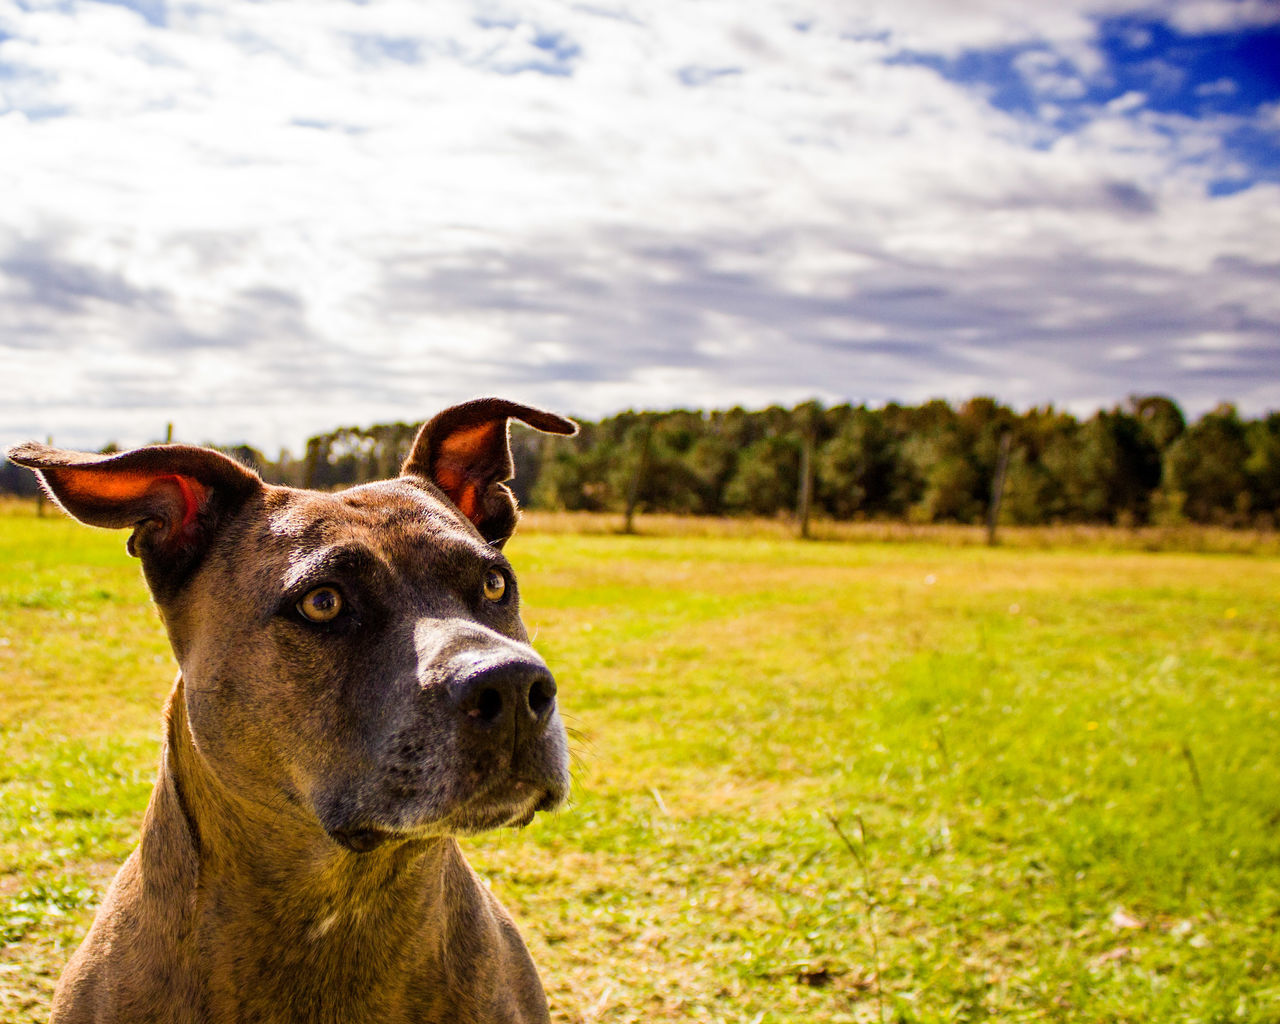 animal themes, domestic animals, one animal, mammal, field, sky, no people, grass, focus on foreground, nature, tree, outdoors, cloud - sky, day, portrait, pets, close-up